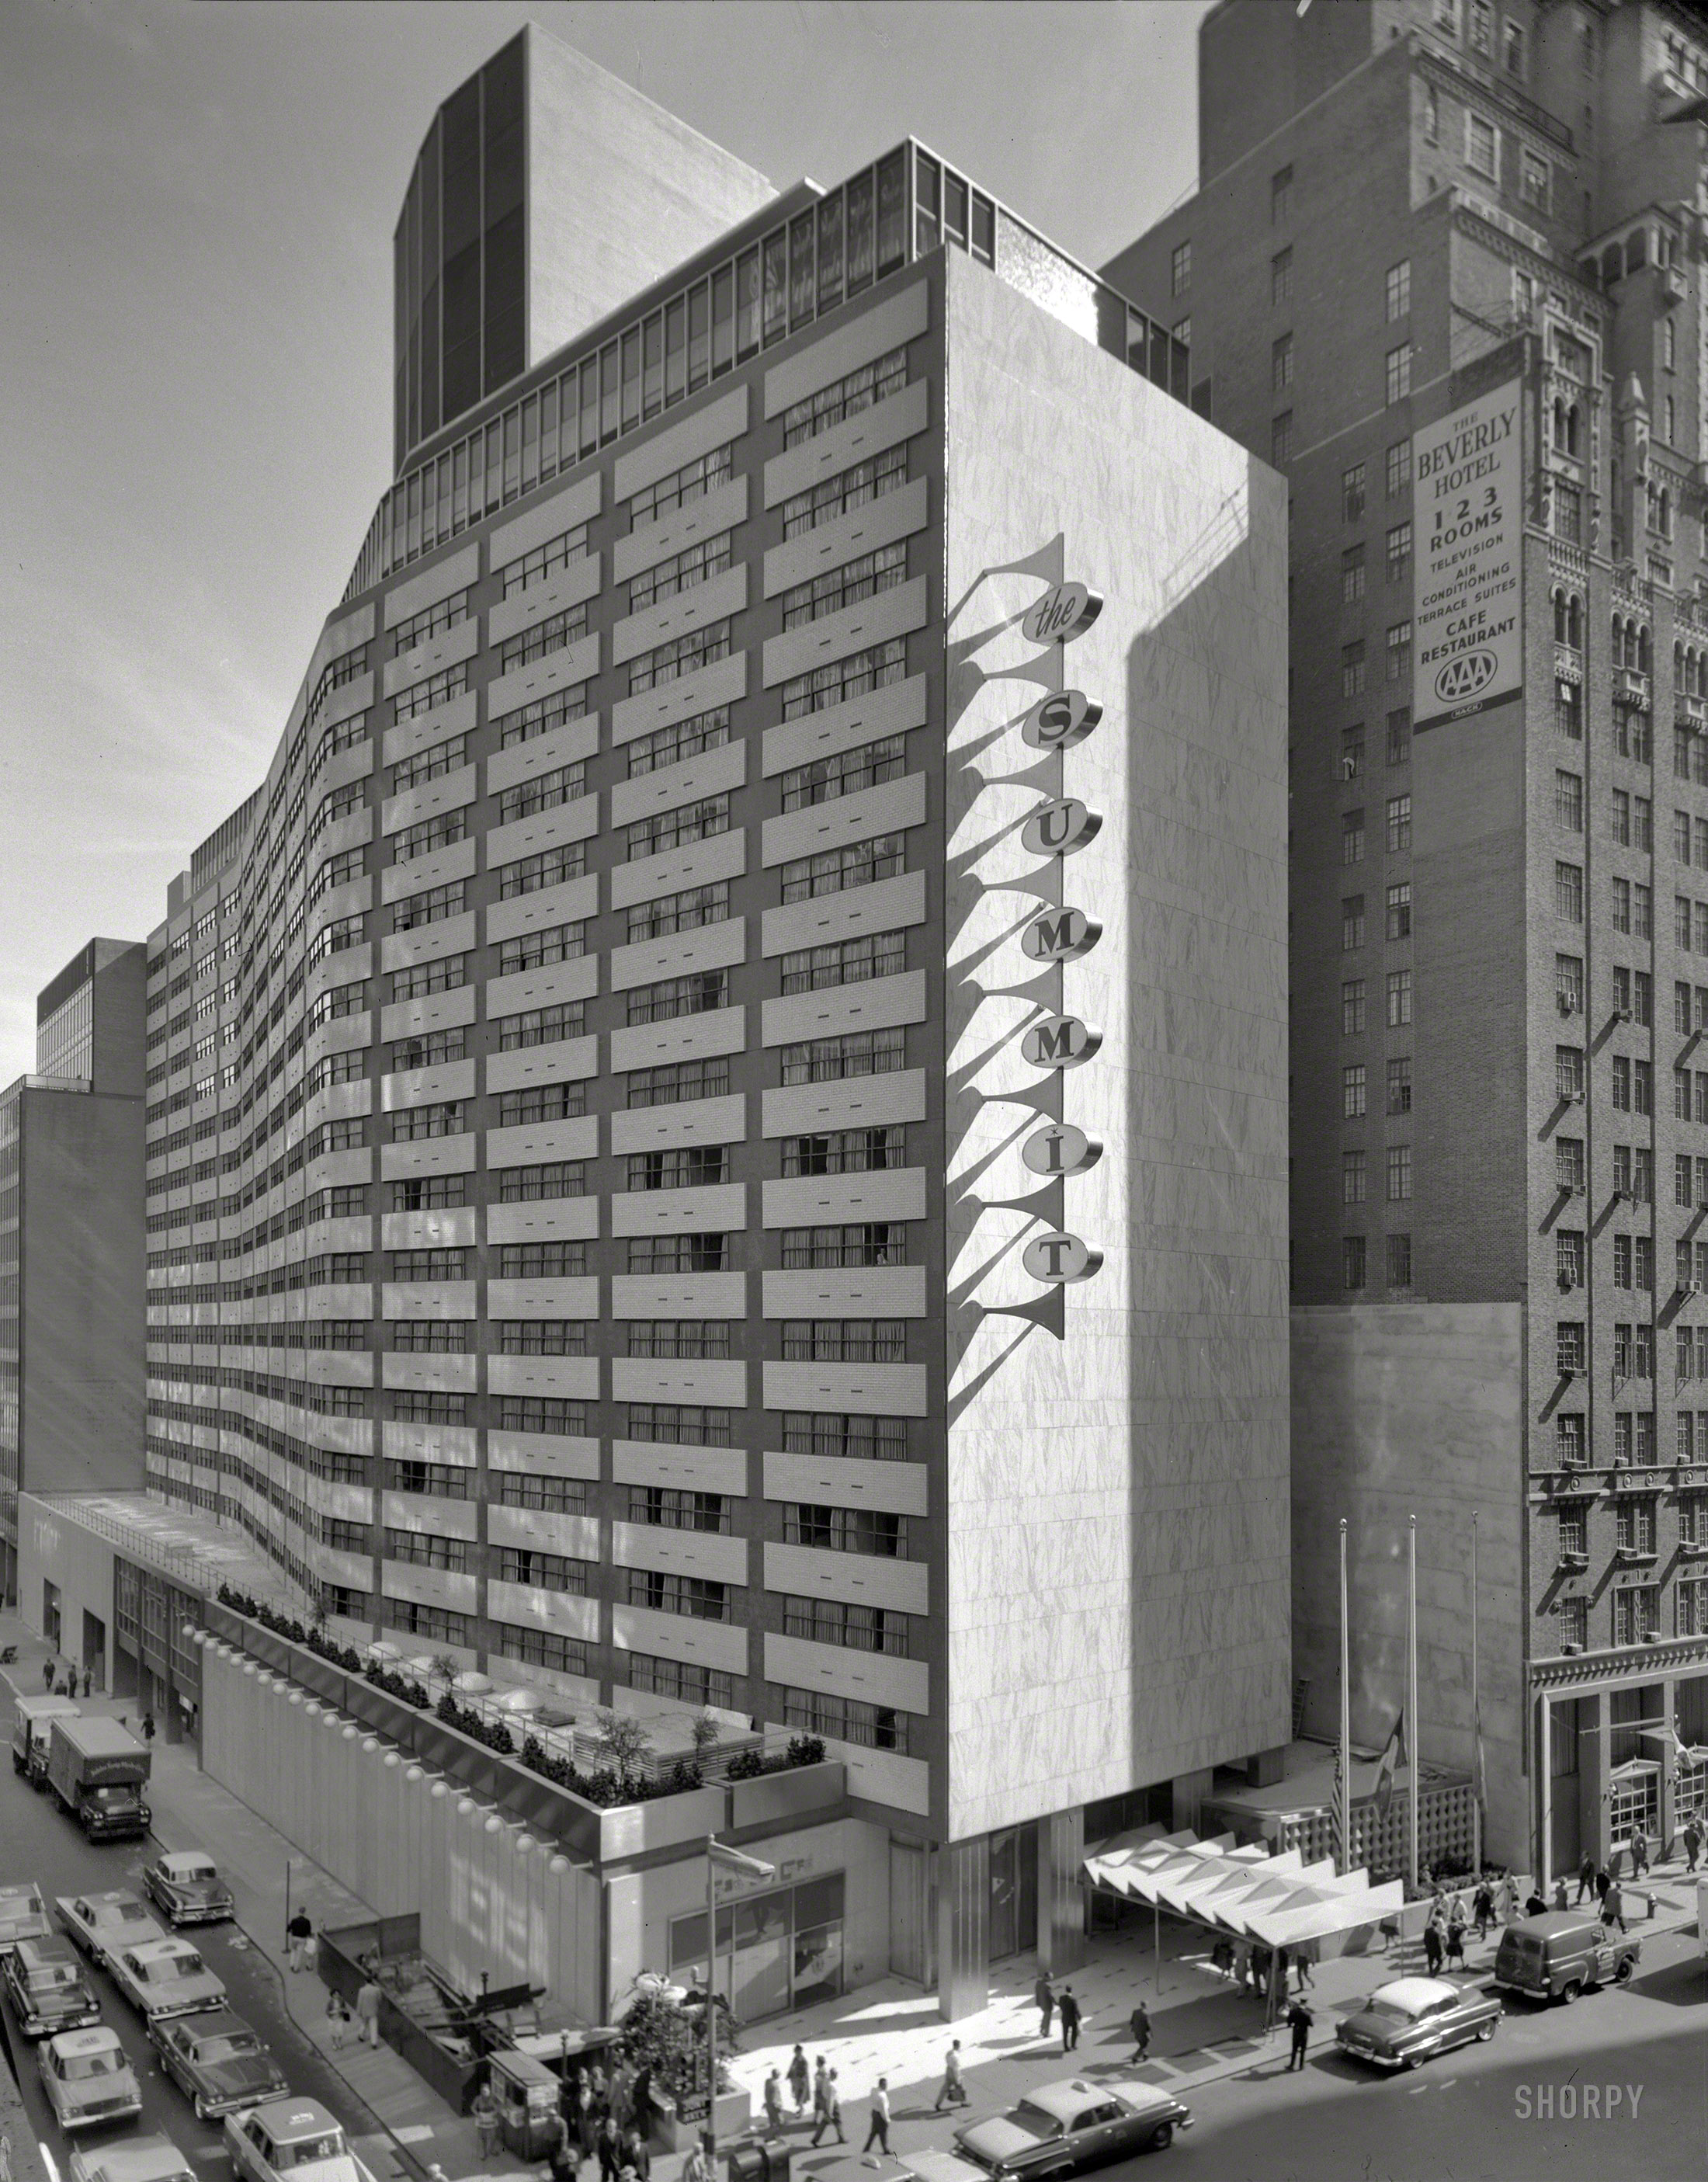 Sept. 18, 1961. New York. "Summit Hotel, 51st Street and Lexington Avenue. Exterior from northwest. Morris Lapidus, Harle & Liebman, architects." Hints of Cold War intrigue here. Gottscho-Schleisner photo. View full size.